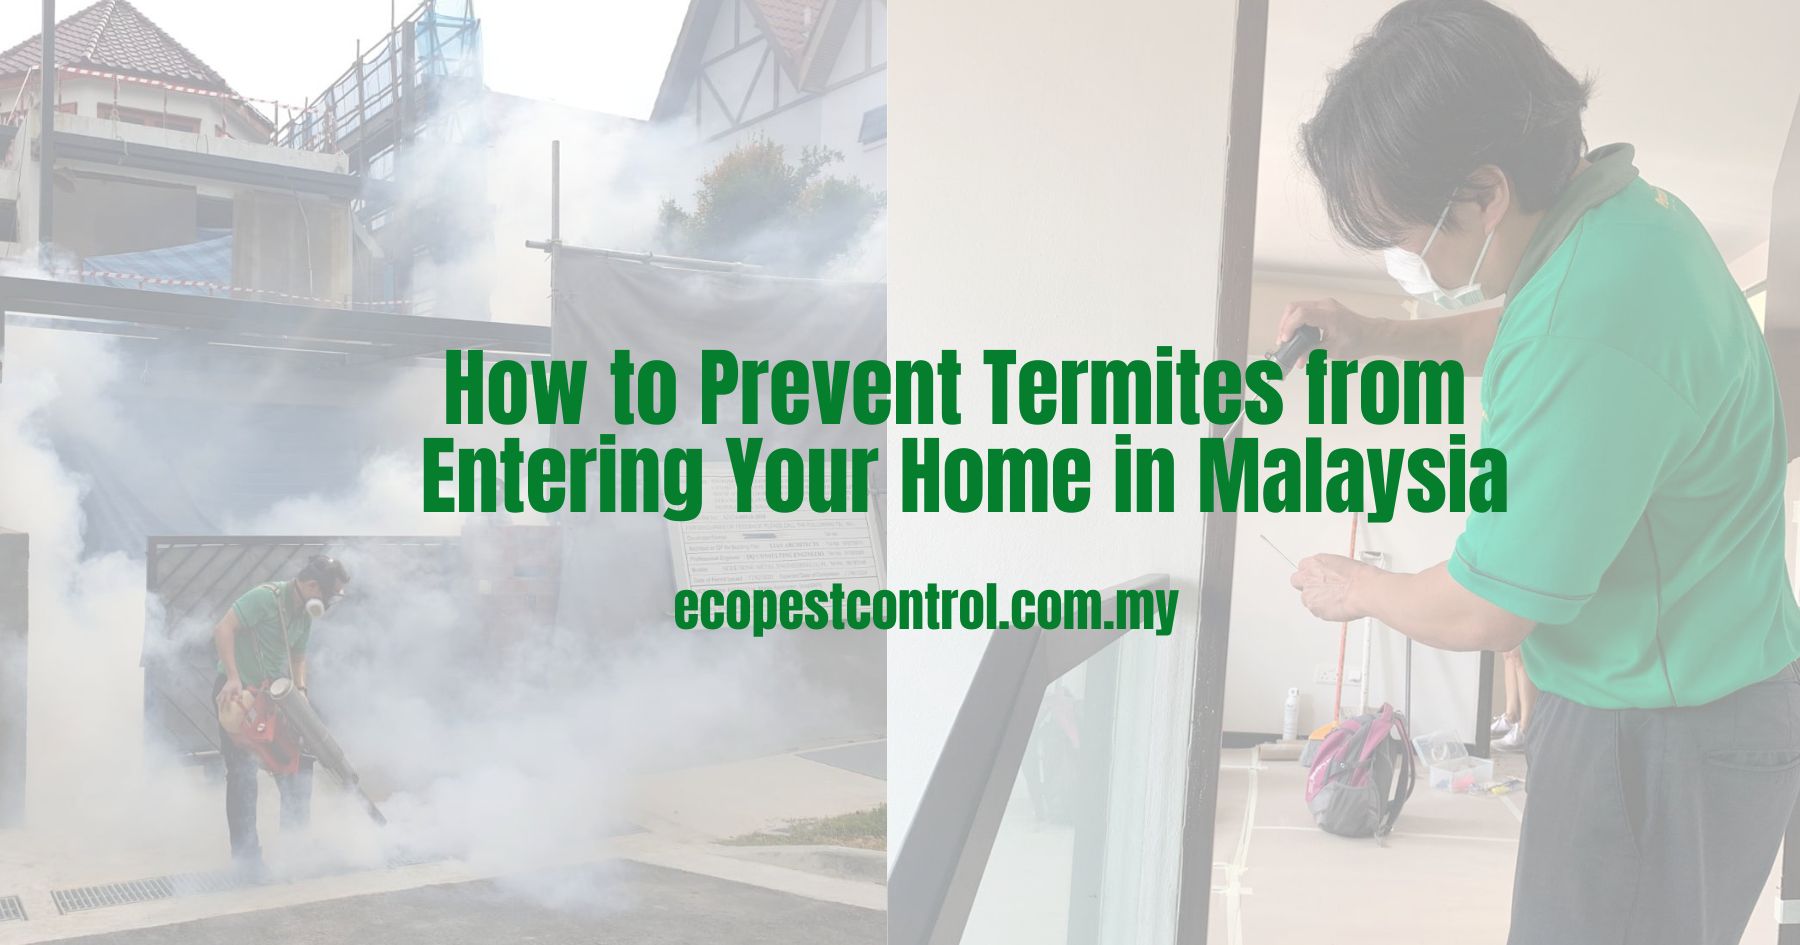 How to Prevent Termites from Entering Your Home in Malaysia